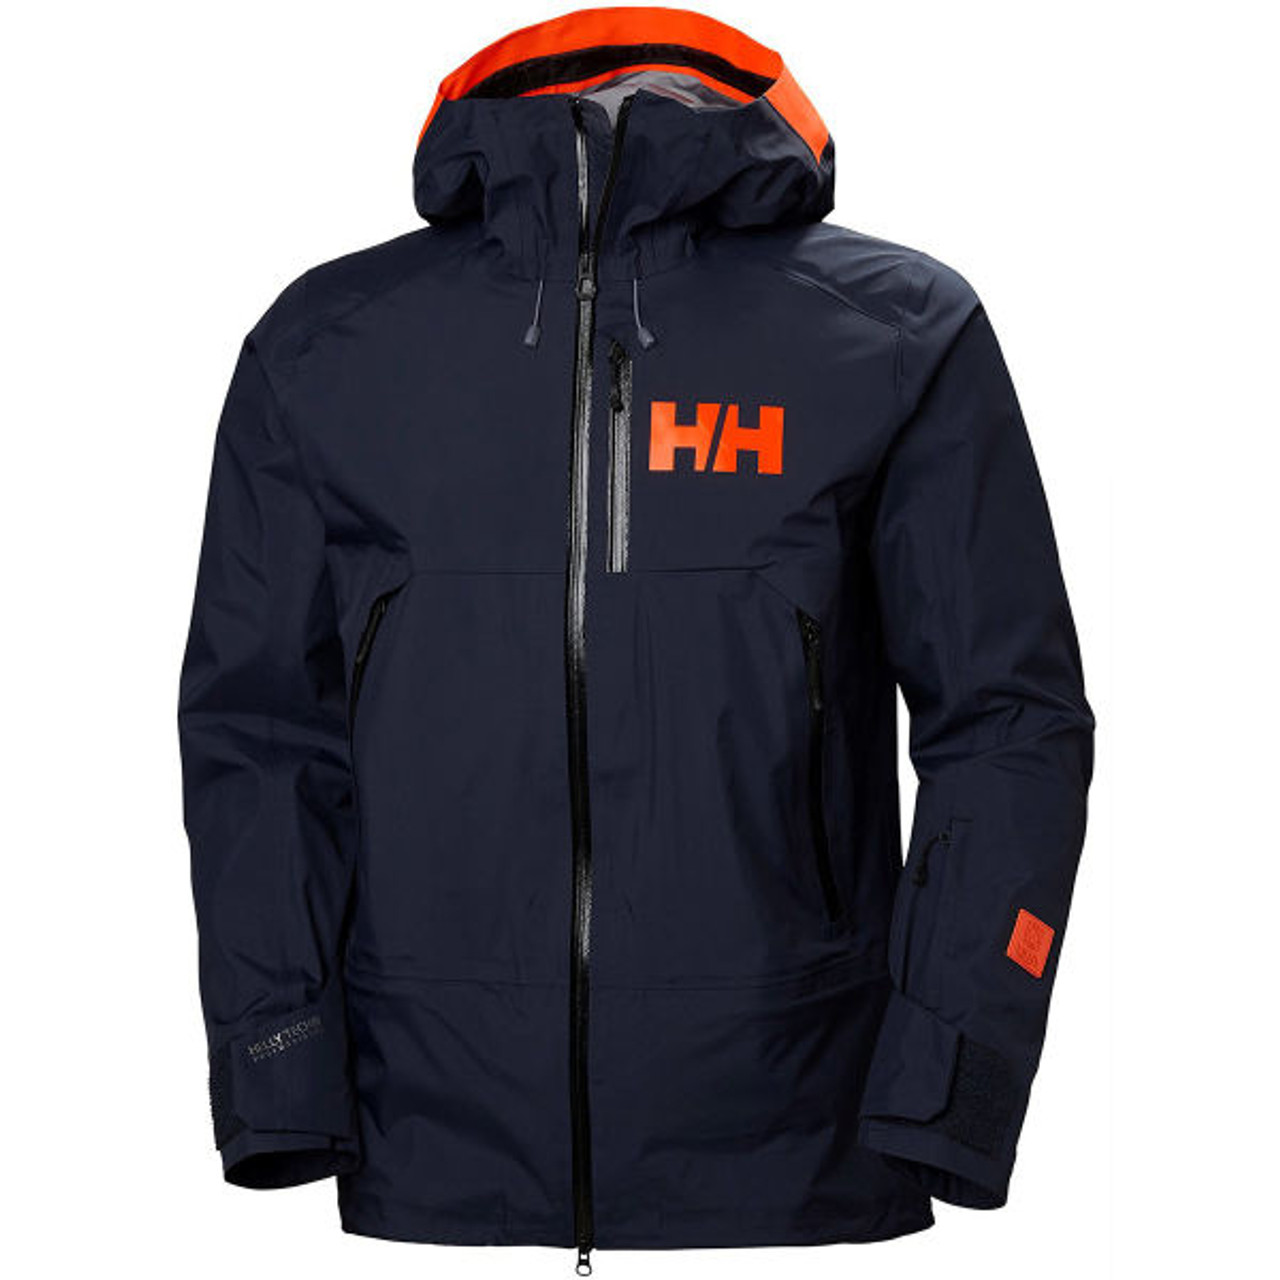 Helly Hansen Sogn Shell 2.0 Jacket 2021 - Getboards Ride Shop